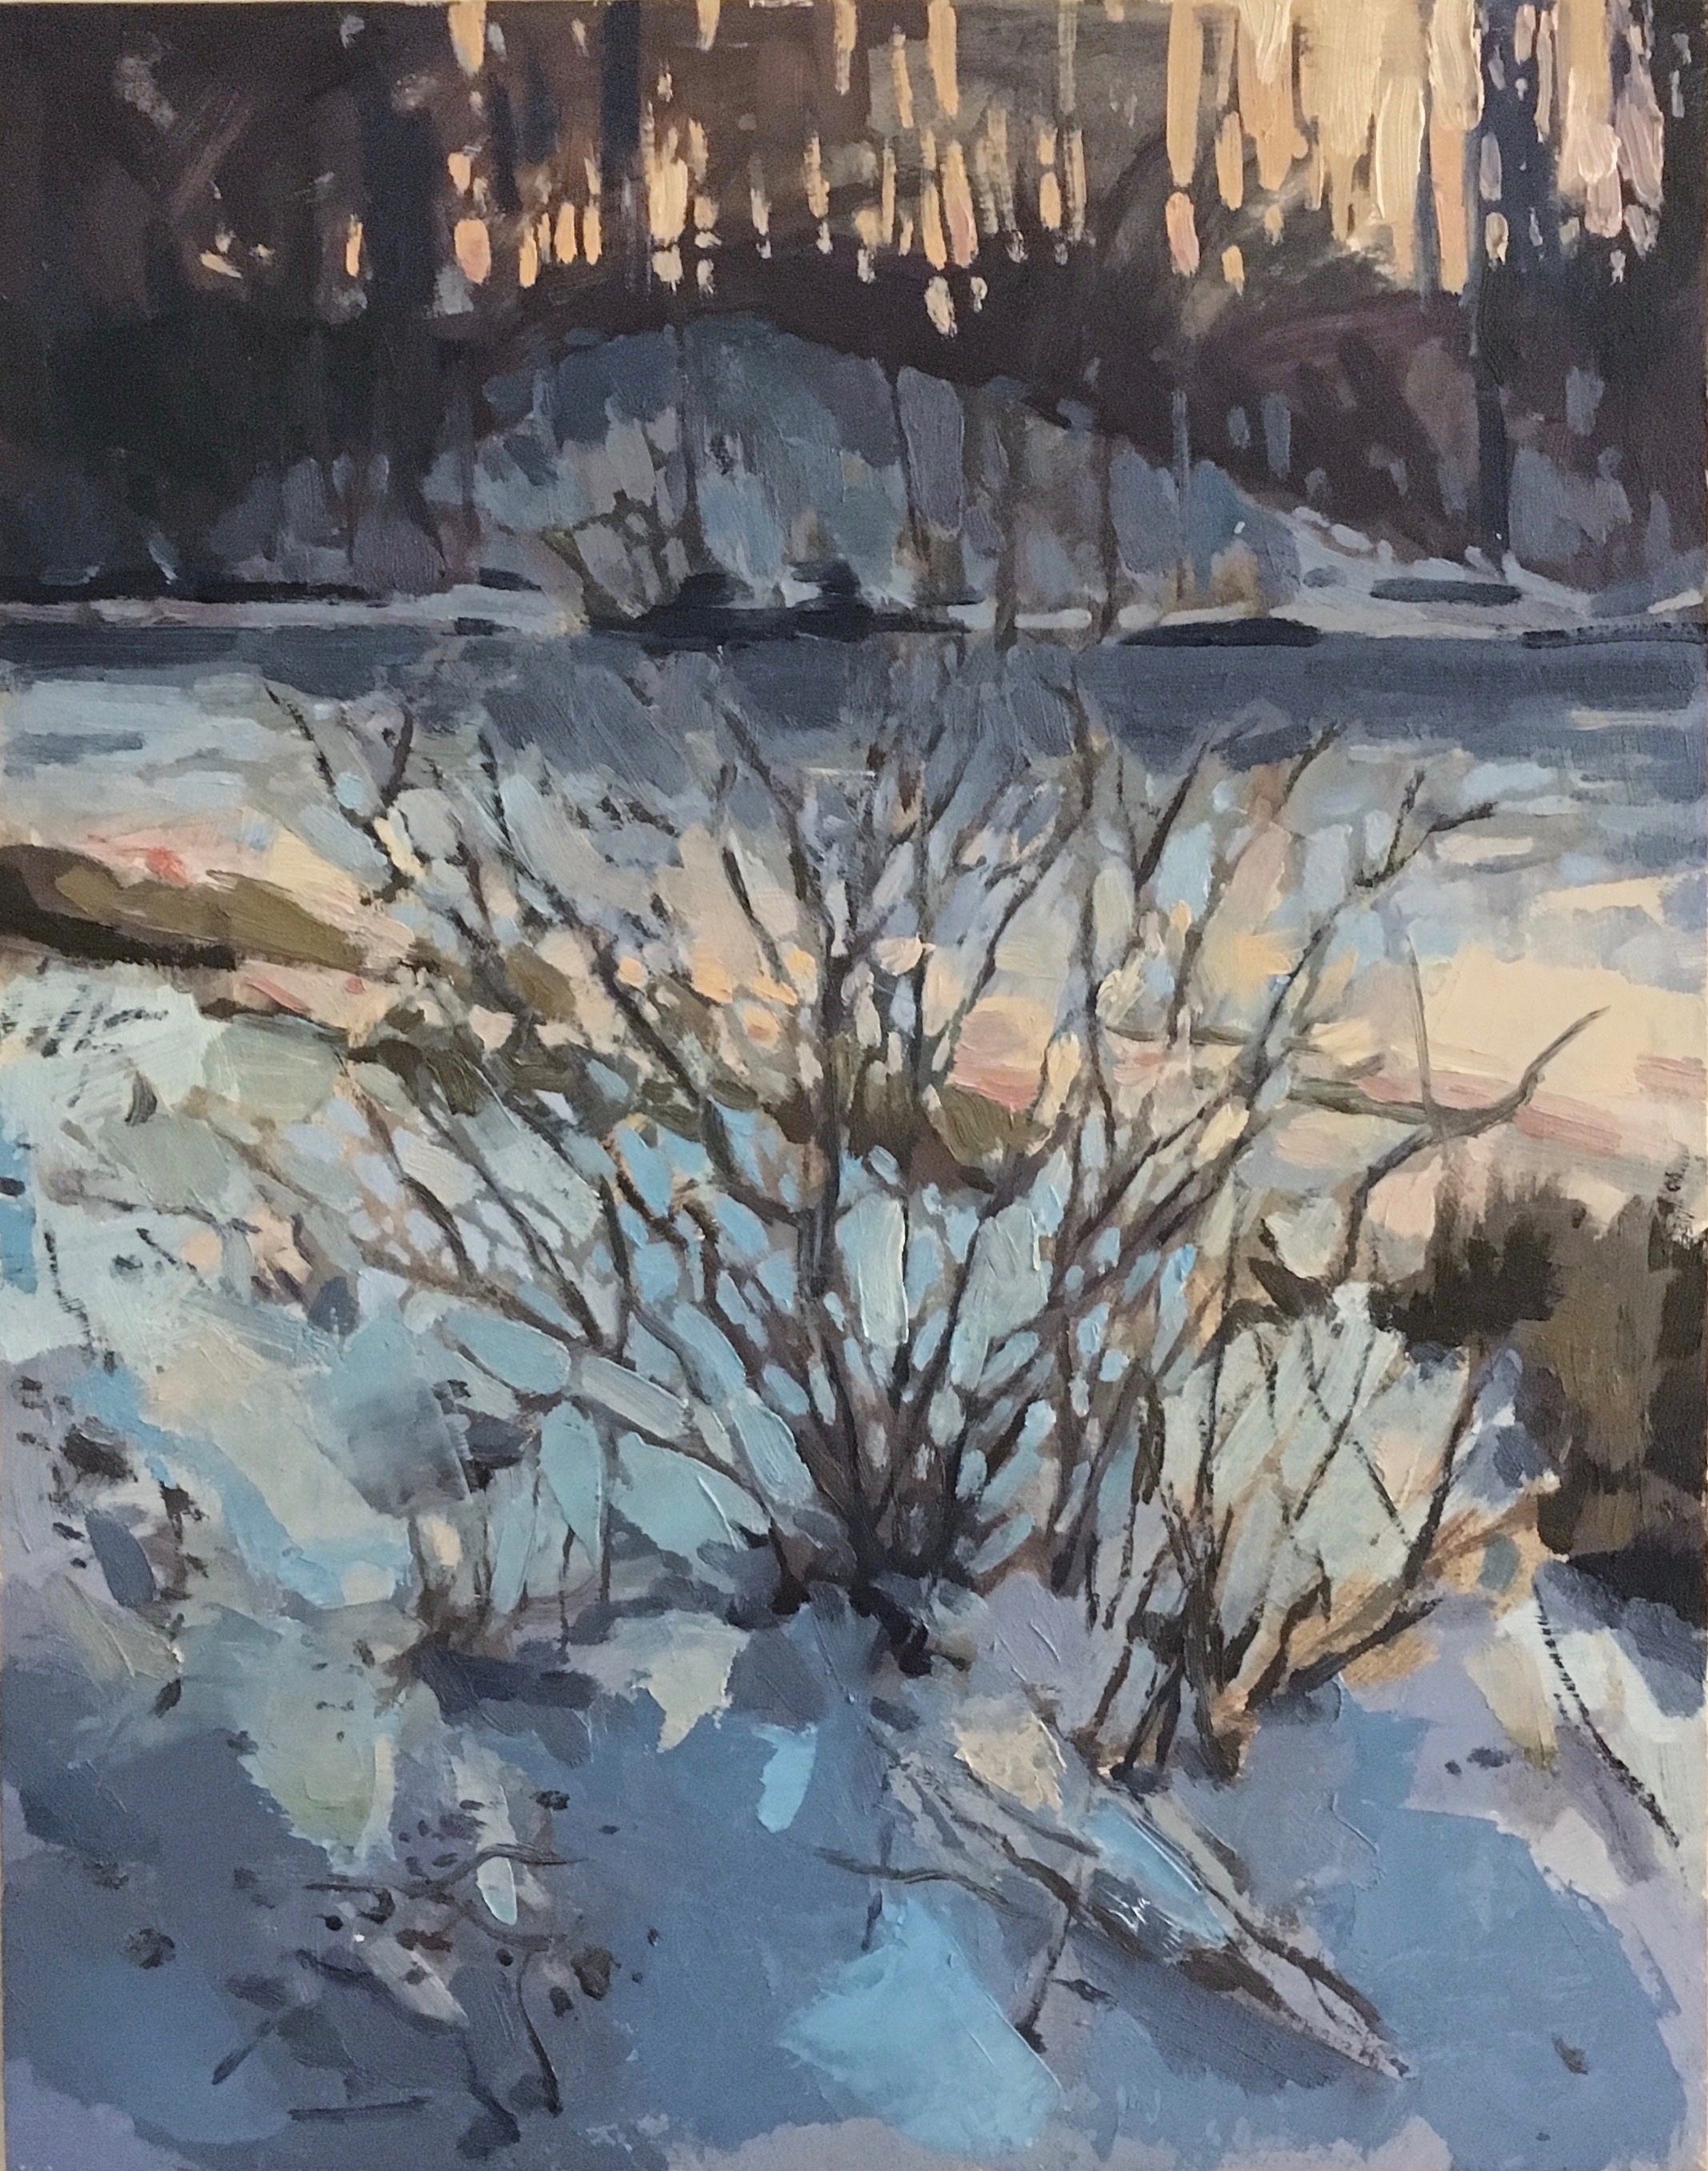 Early Thaw, Oil on panel, 11x14”, 2017